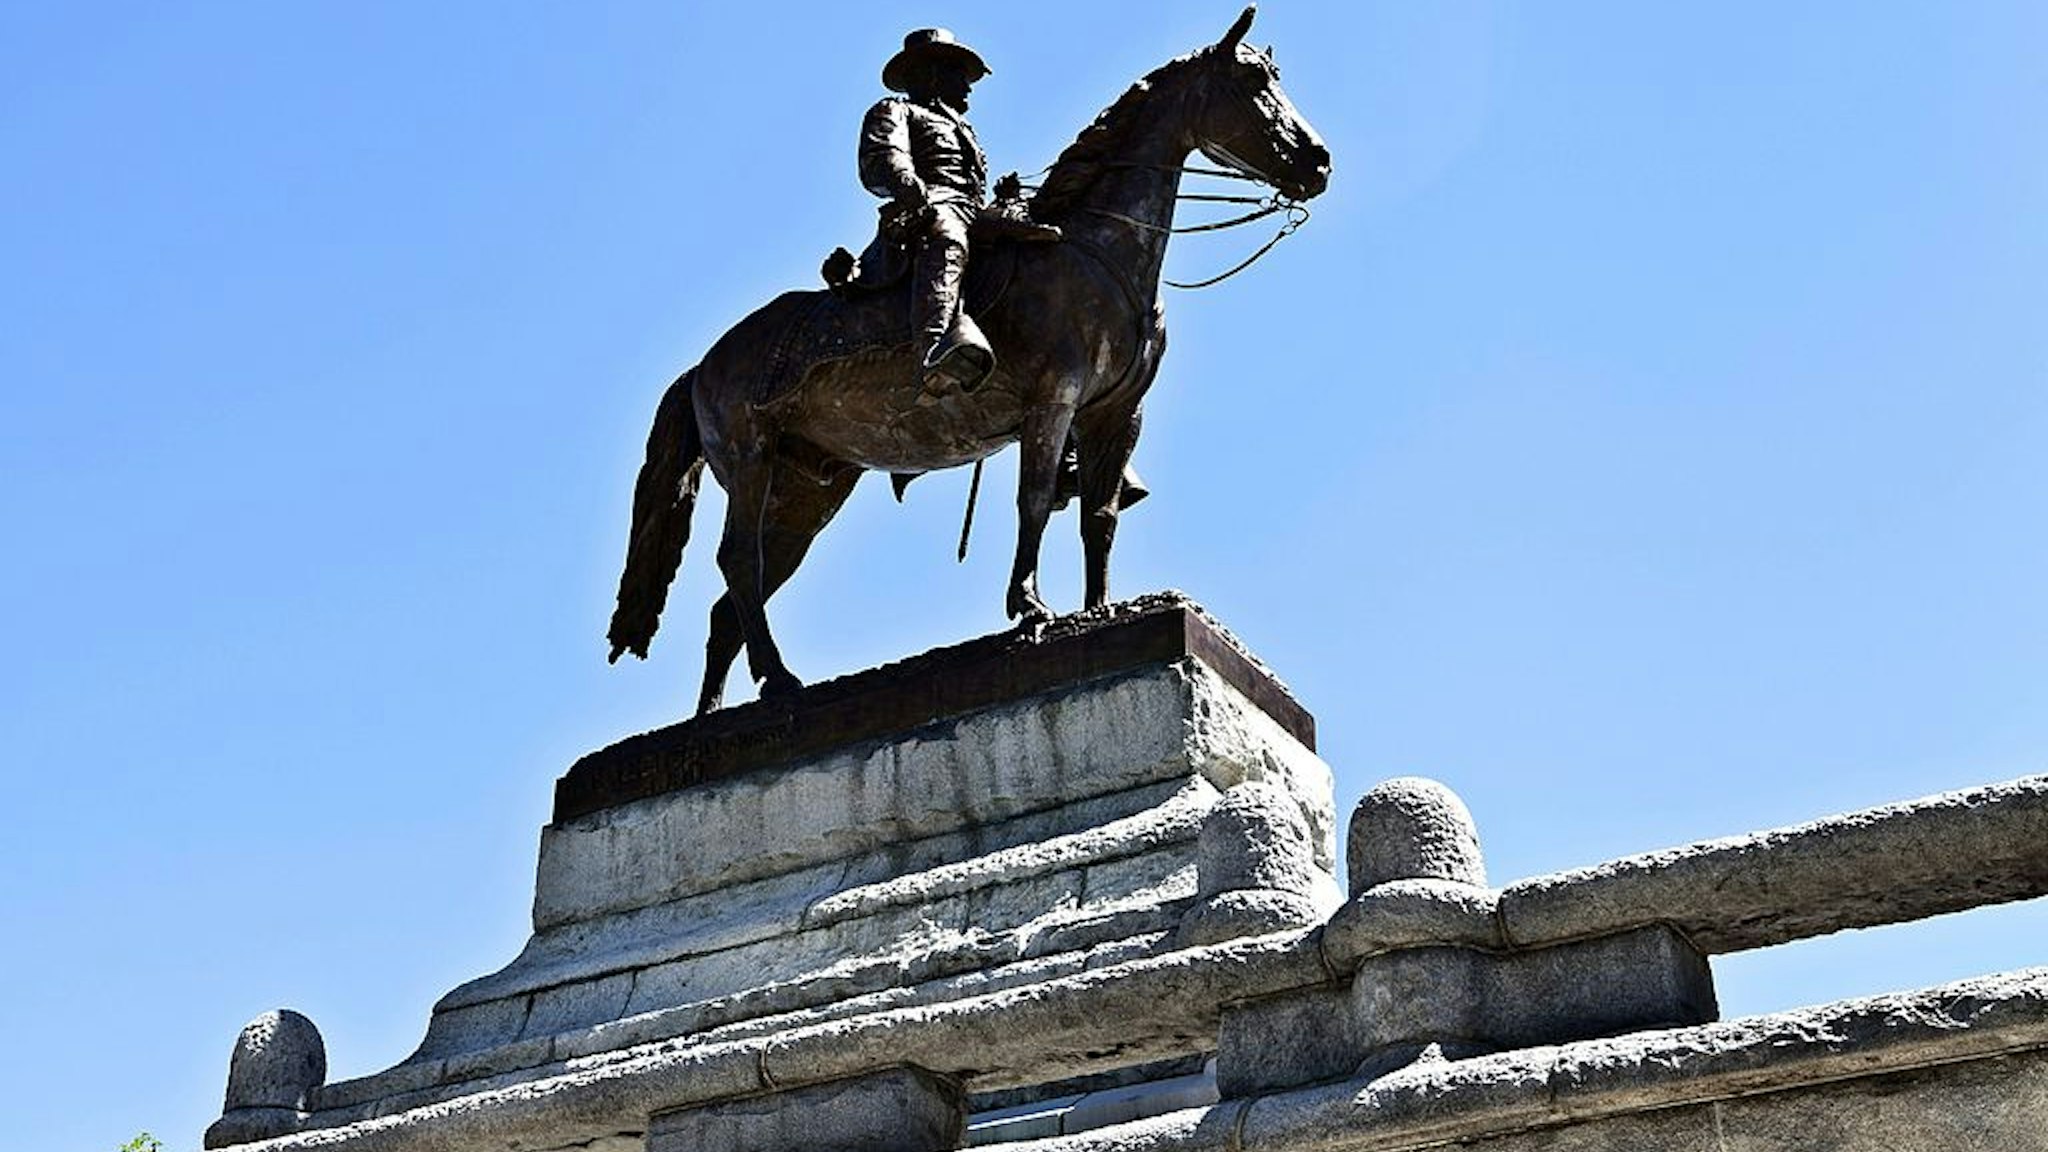 CHICAGO - MAY 24: Louis T. Rebisso's Ulysses S. Grant Memorial, sits outside the southern entrance to Lincoln Park Zoo in Chicago, Illinois on MAY 24, 2013. (Photo By Raymond Boyd/Getty Images)